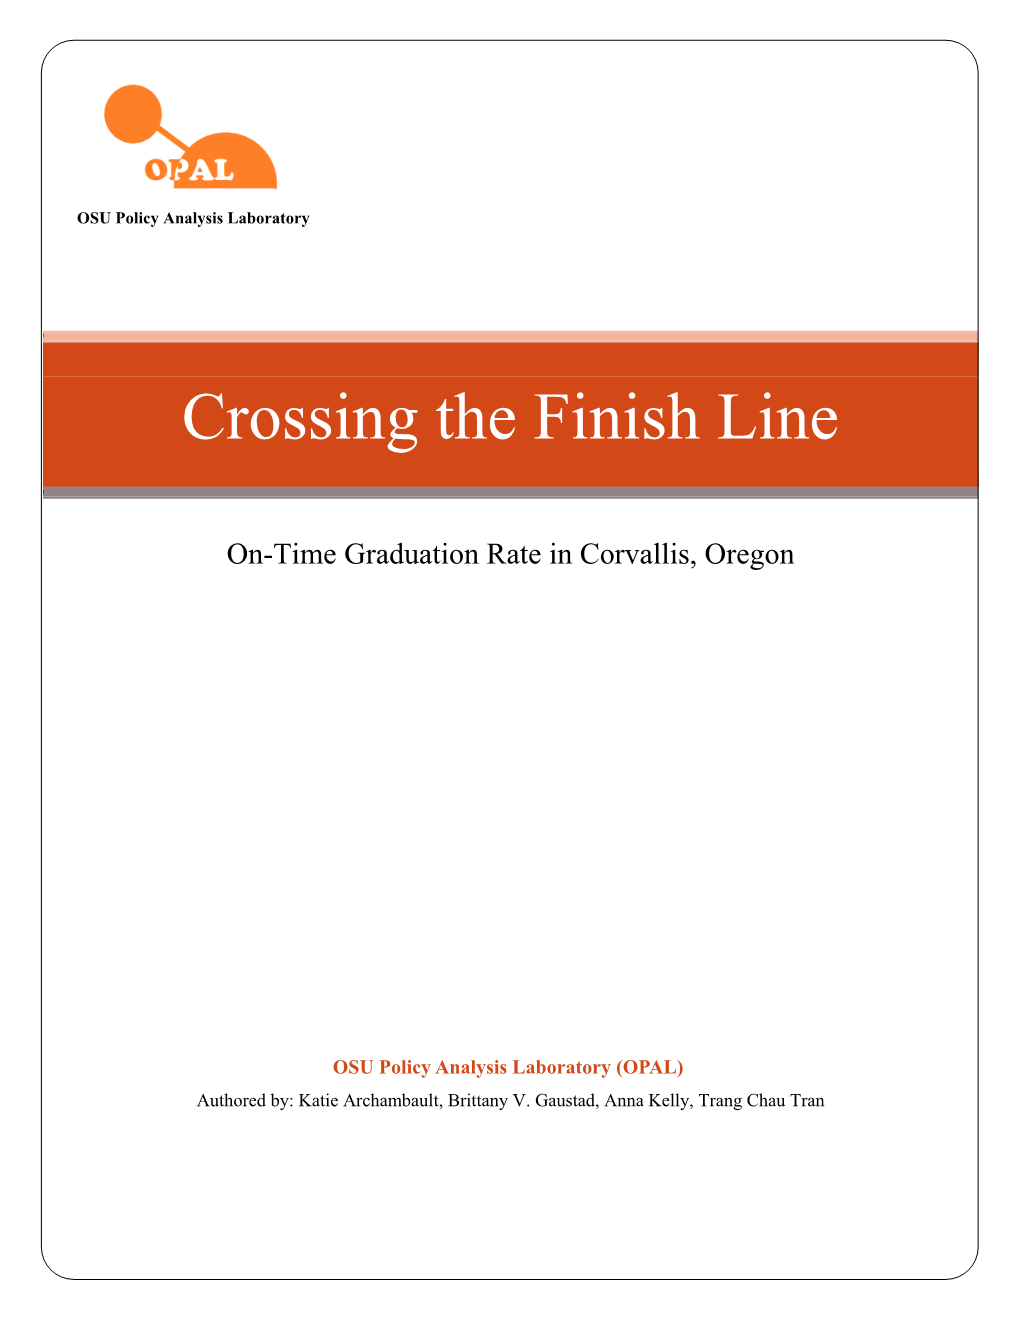 Crossing the Finish Line: On-Time Graduation Rate in Corvallis, Oregon